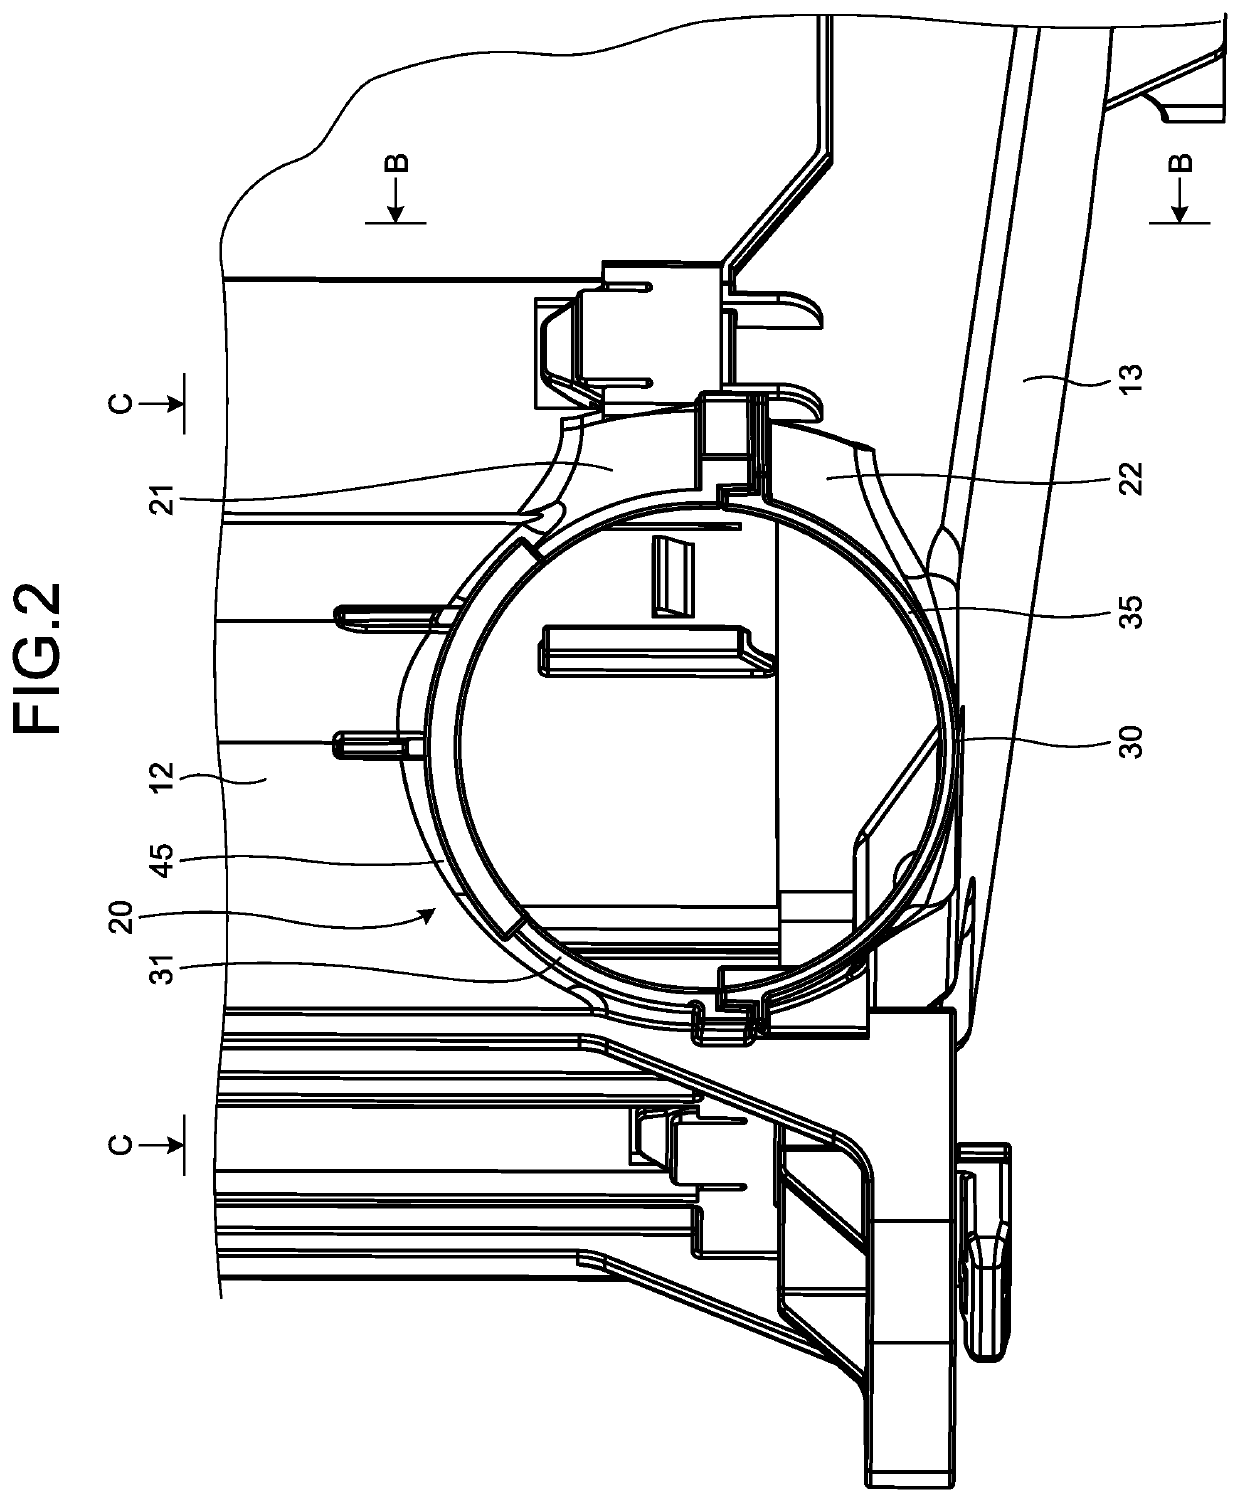 Electric wire fixing structure, electrical connection box, and wire harness